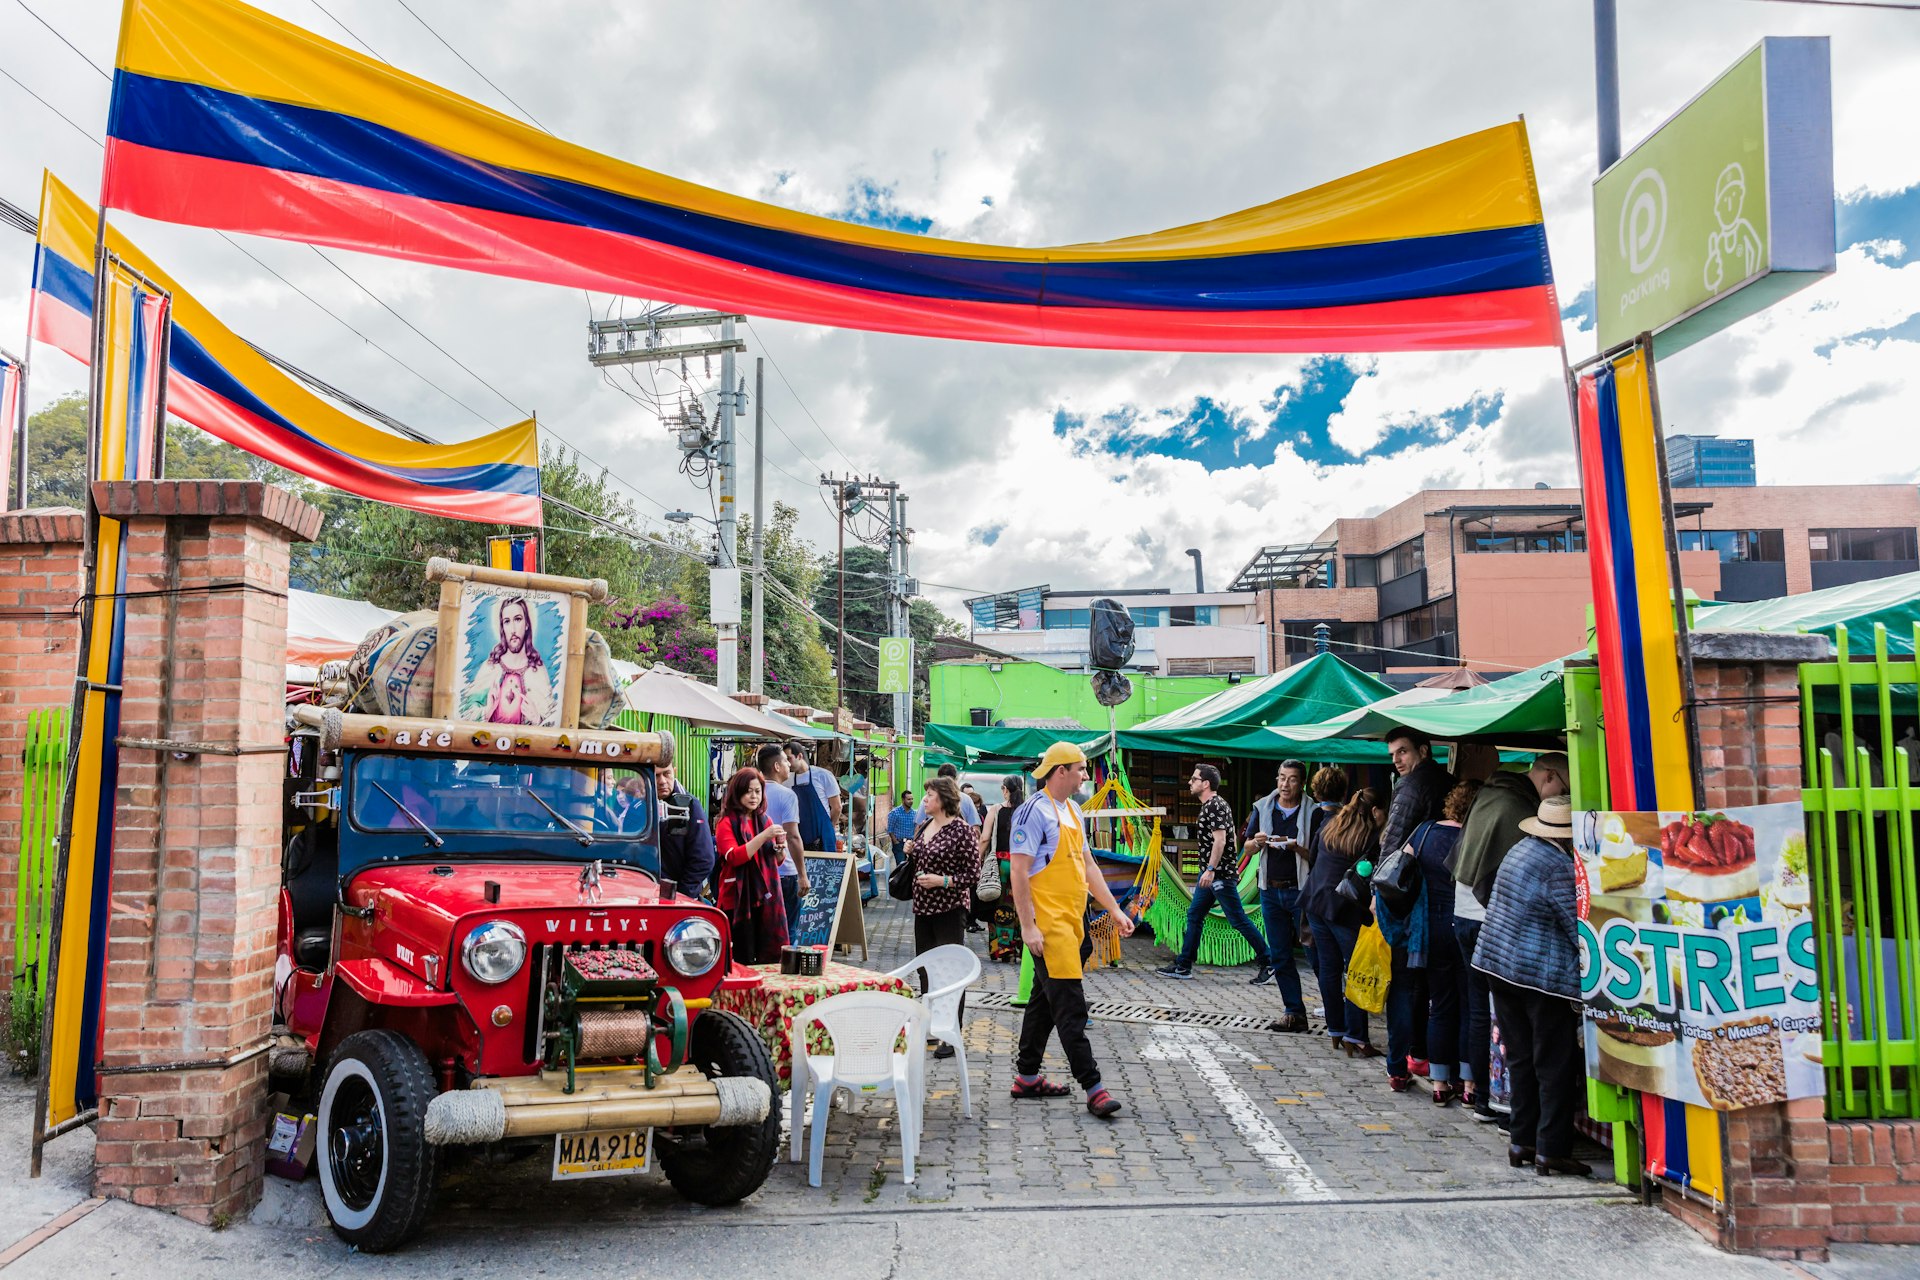 The entrance to a market flanked by stalls, a large truck, and lots of people with a red, yellow and blue Colombian flag flying overhead